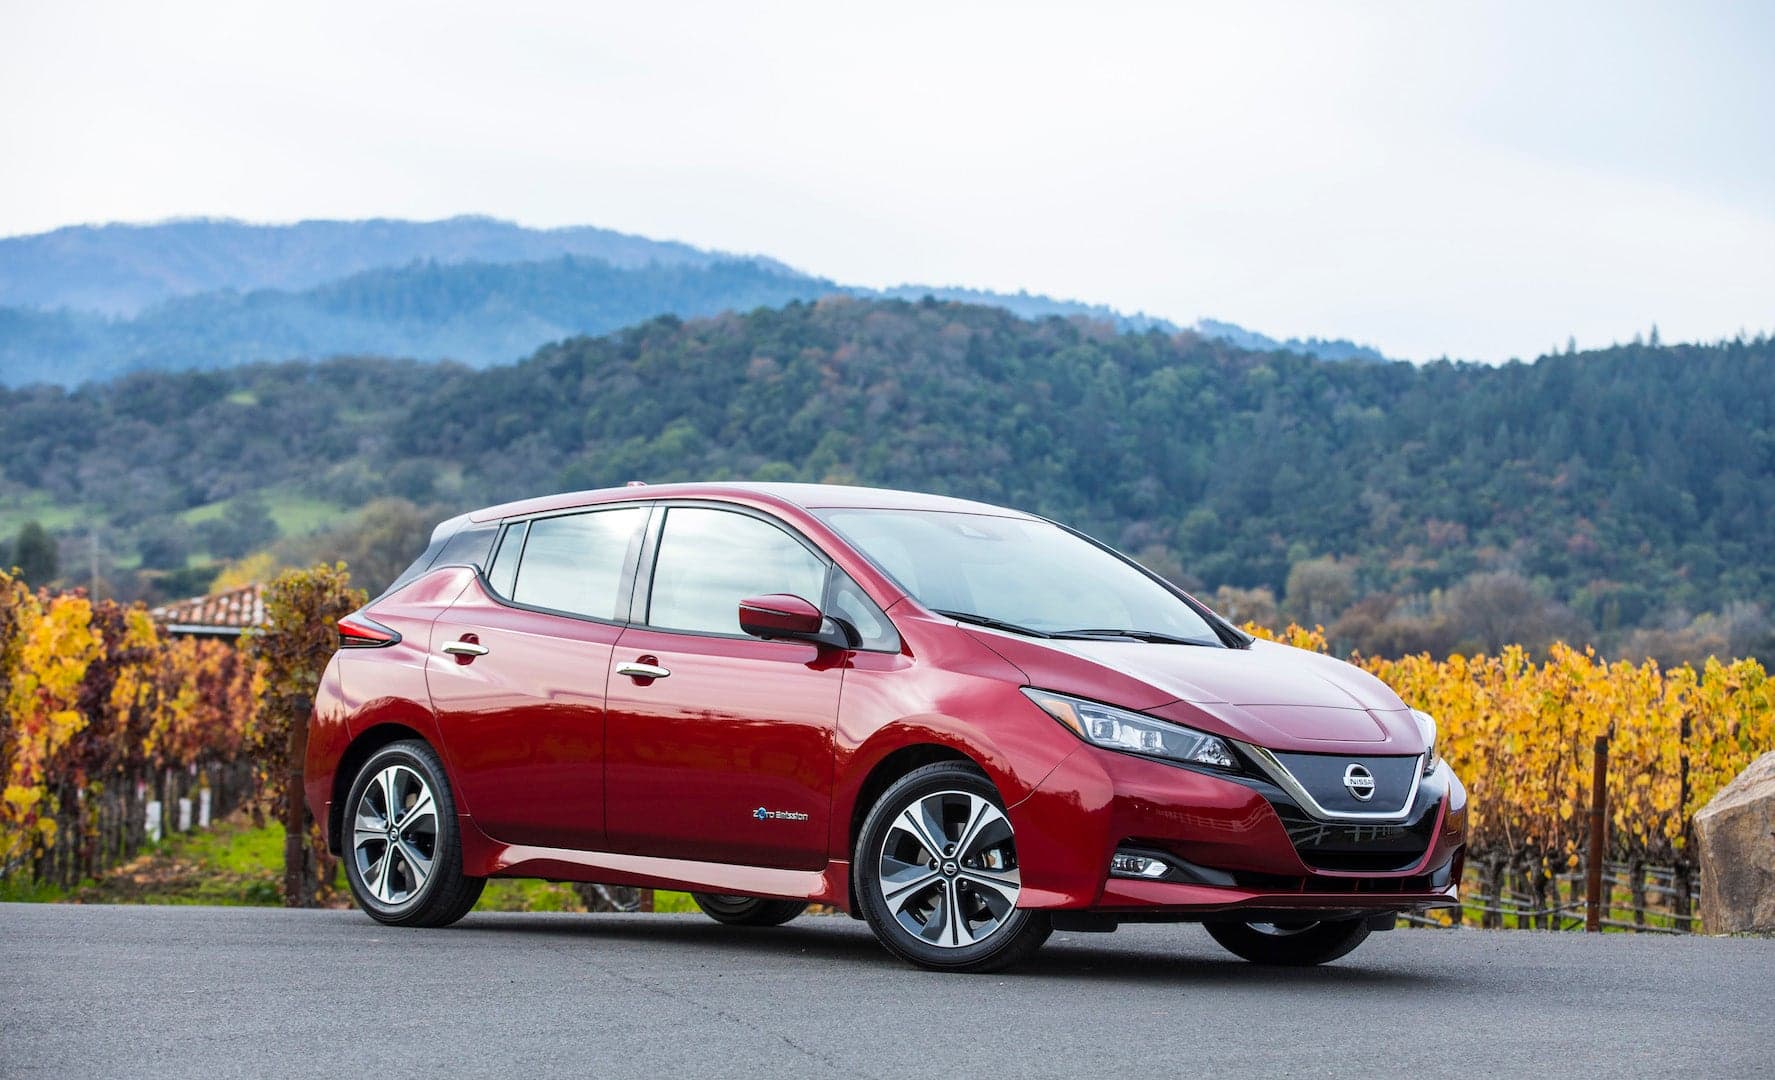 The 2018 Nissan Leaf, Unplugged: An Otherwise-Exemplary EV Falls Short in Driving Range